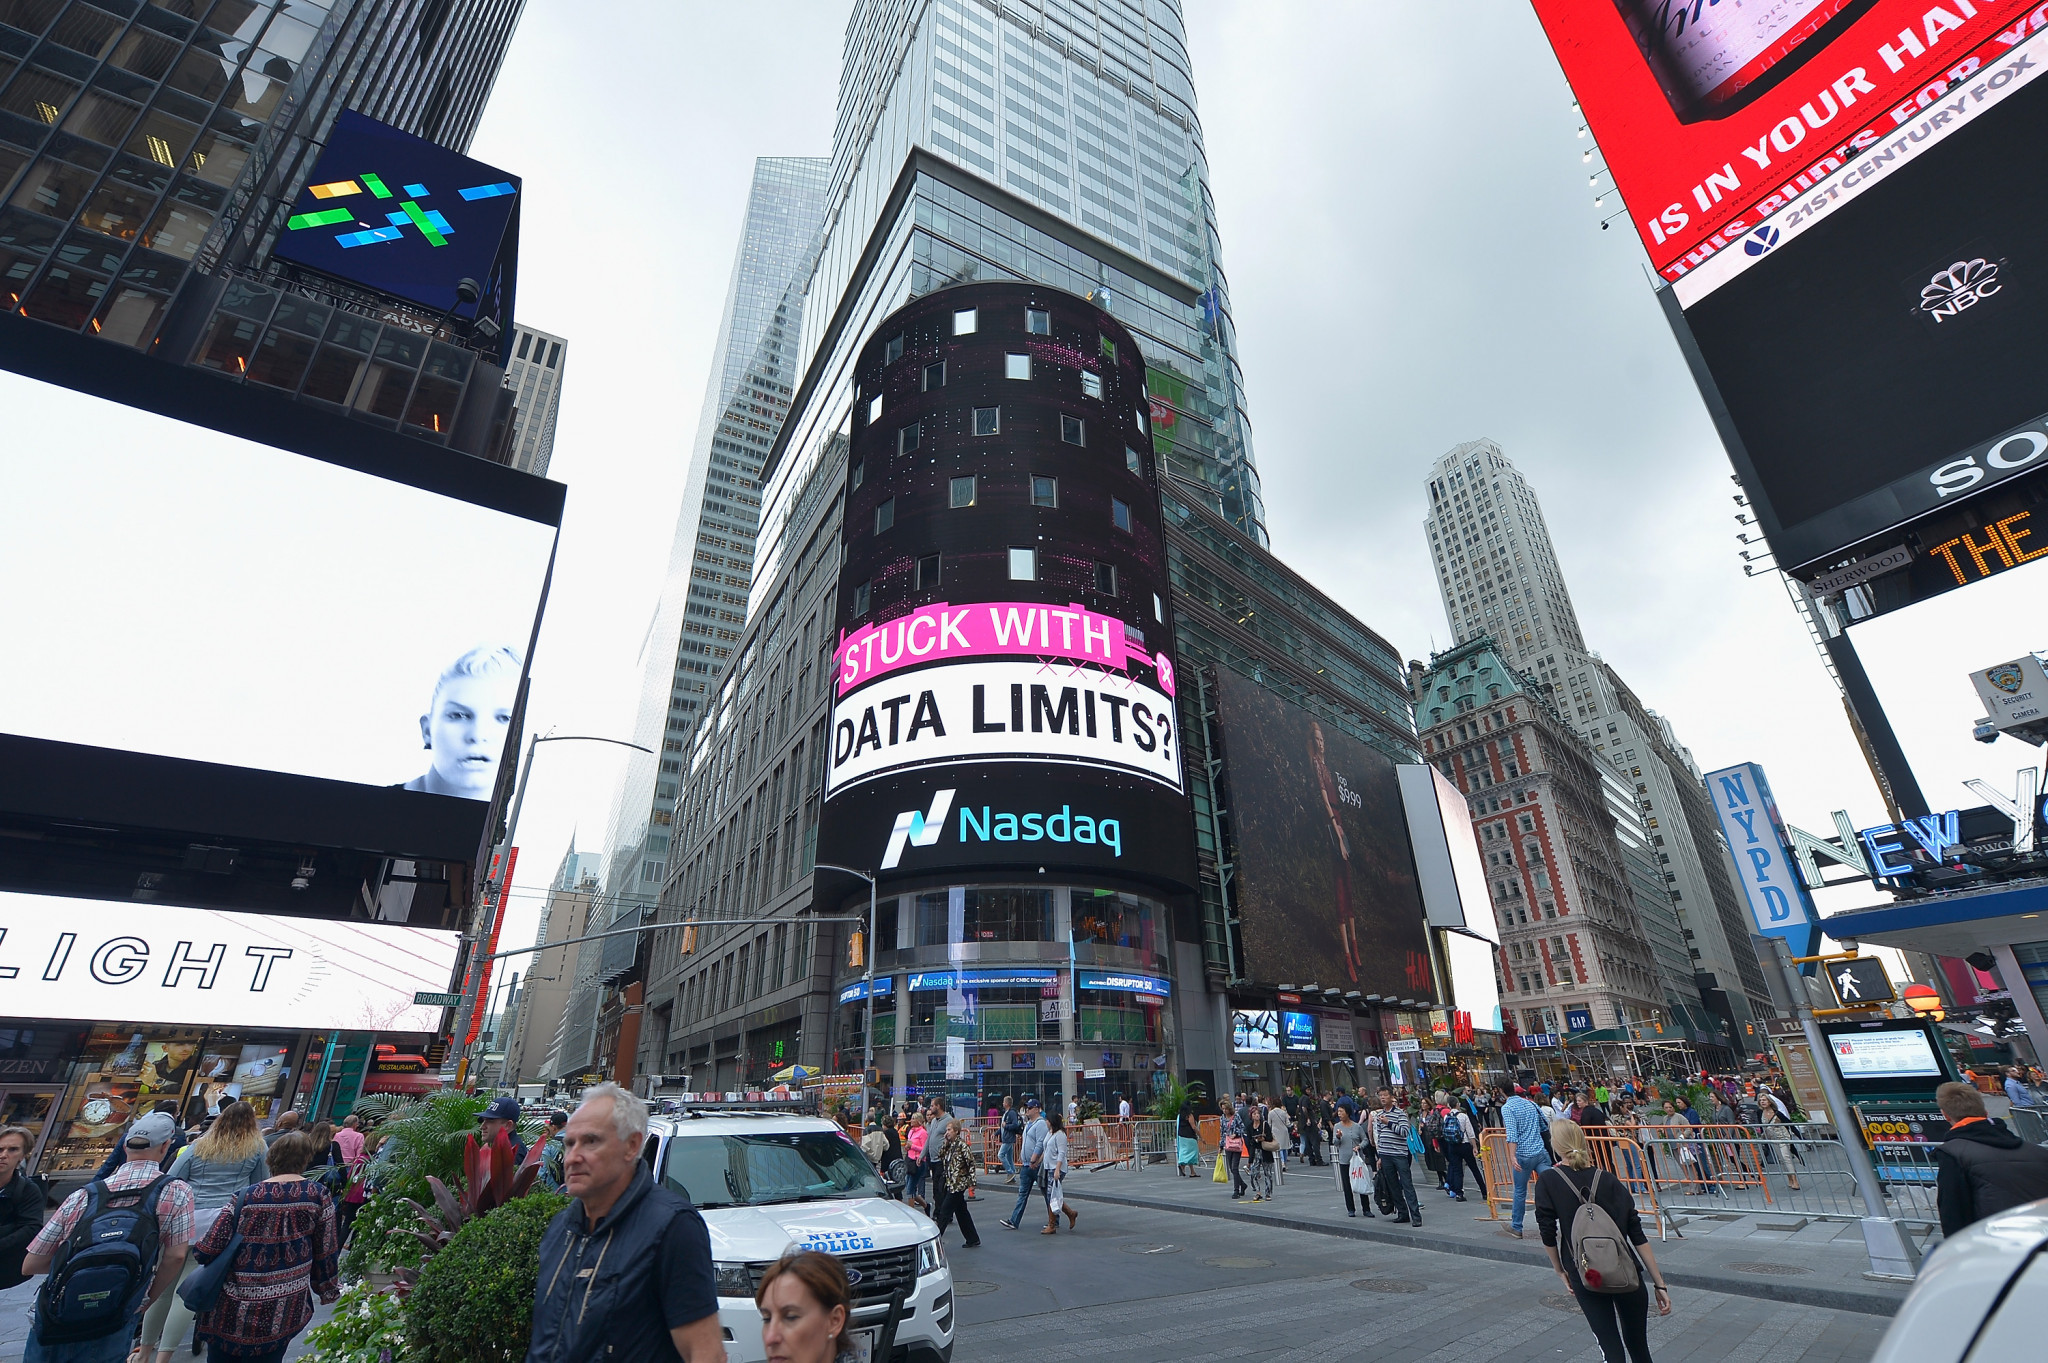 Wanda Sports Group has been listed on Nasdaq with an eye on raising funds and awareness ahead of the 2022 Winter Olympic and Paralympic Games in Beijing ©Getty Images